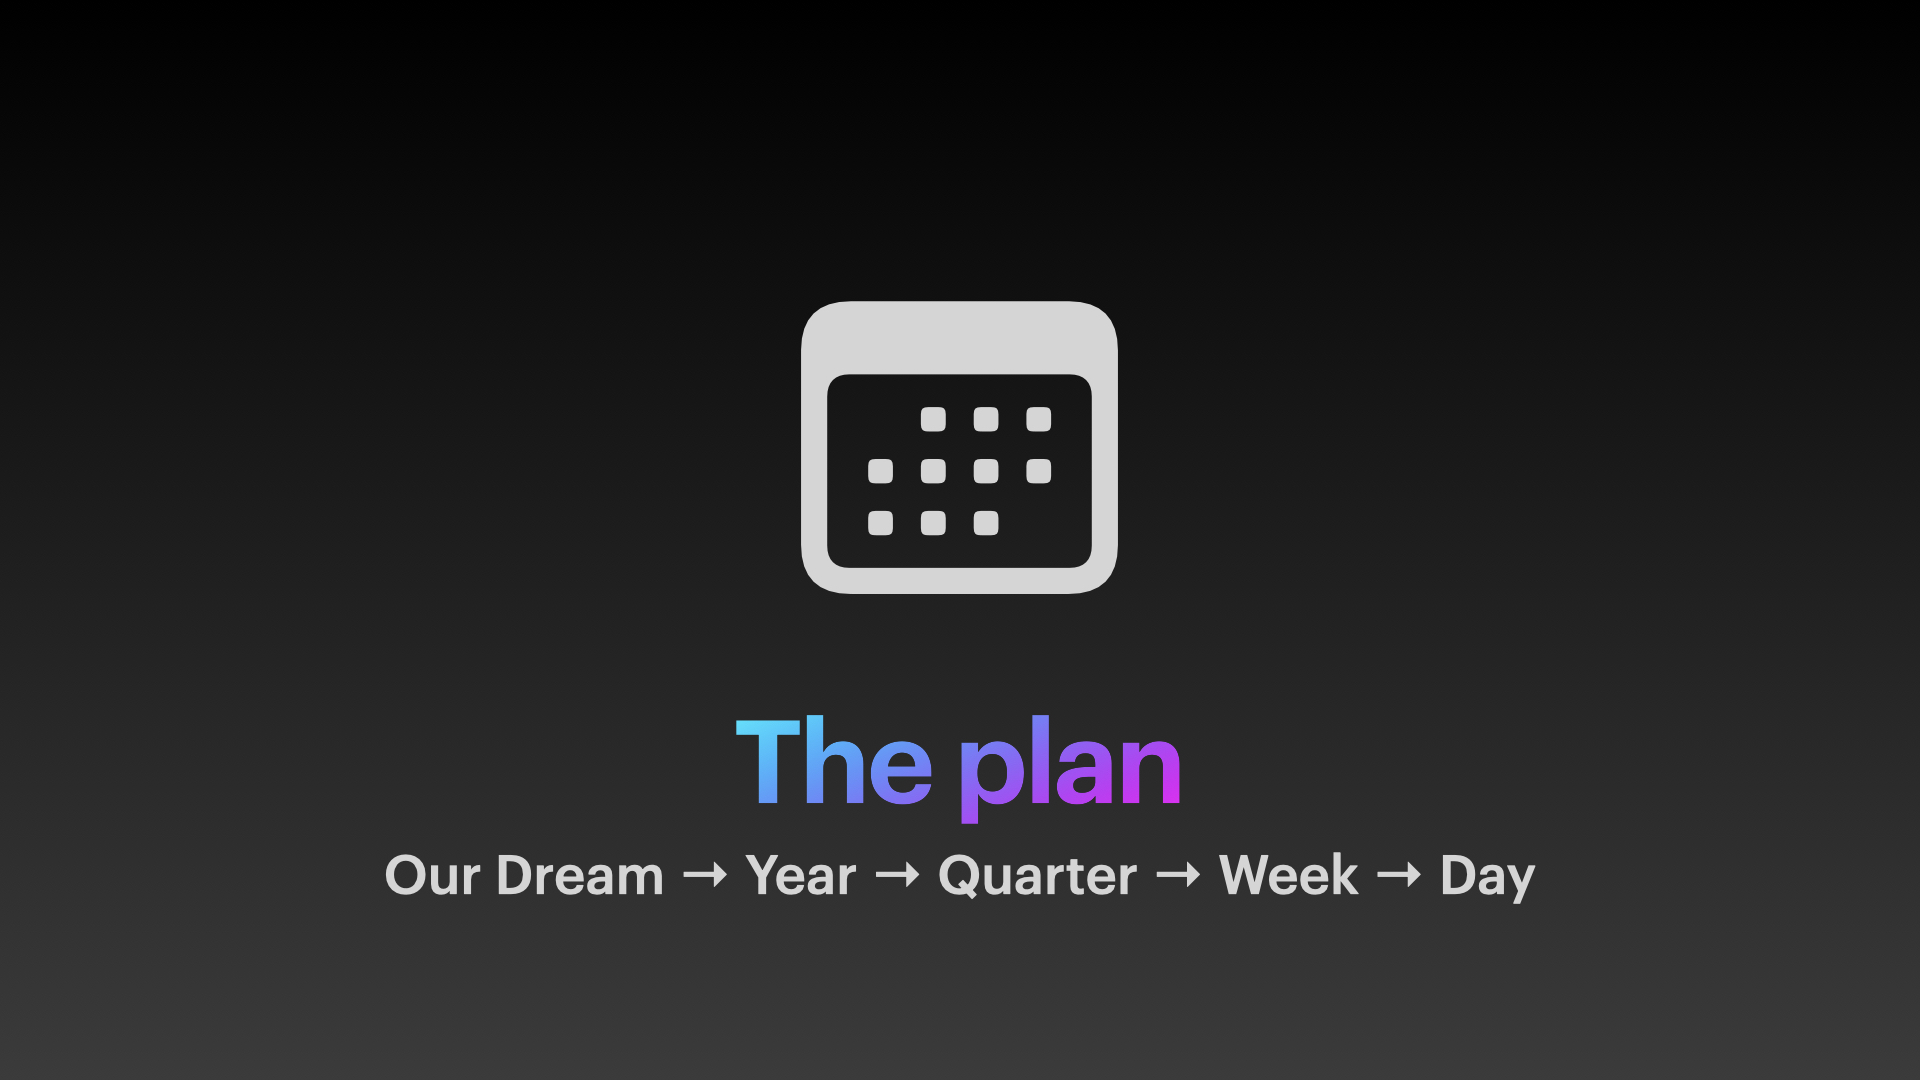 Illustration of a flowchart: Our Dream → Year → Quarter → Week → Day